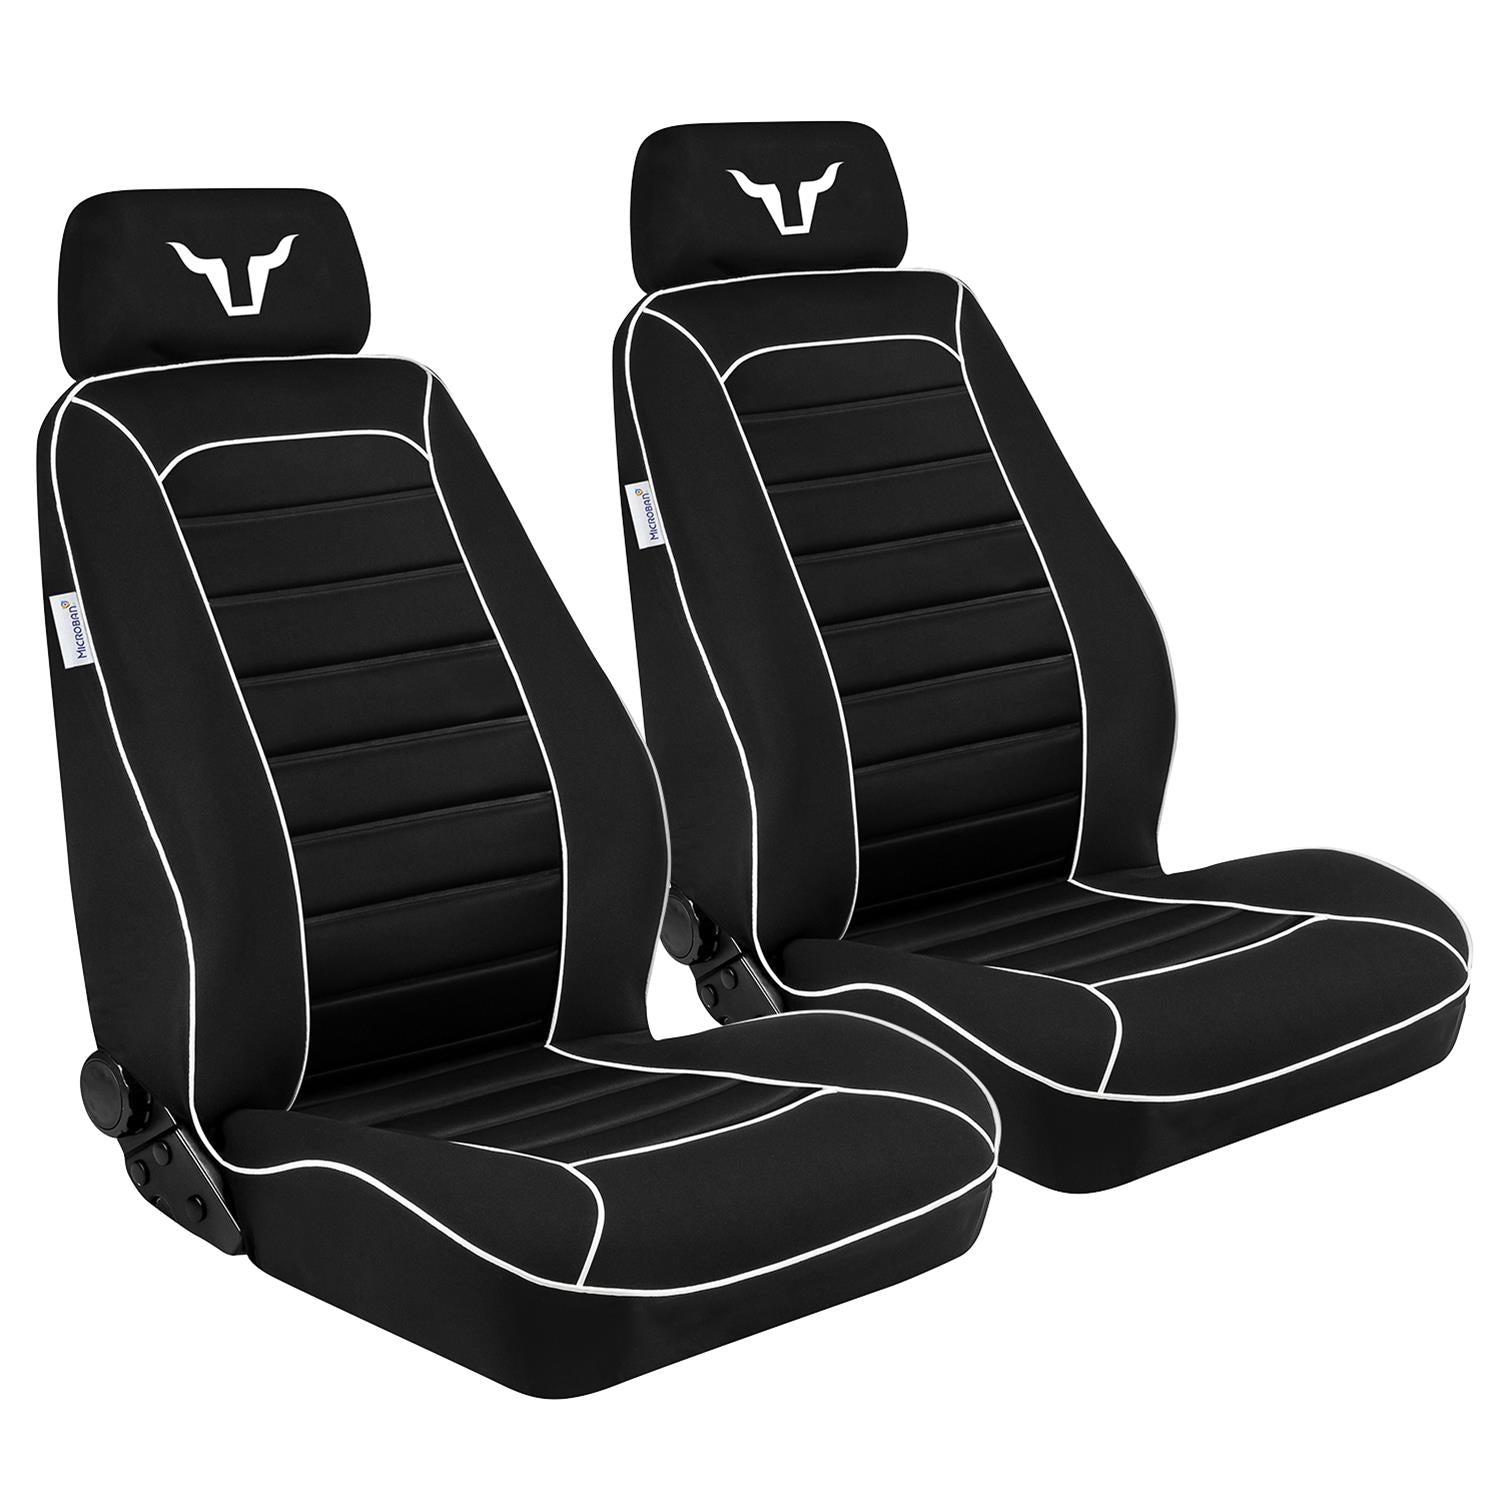 Bully Supreme Neoprene Seat Cover Pair with Microban